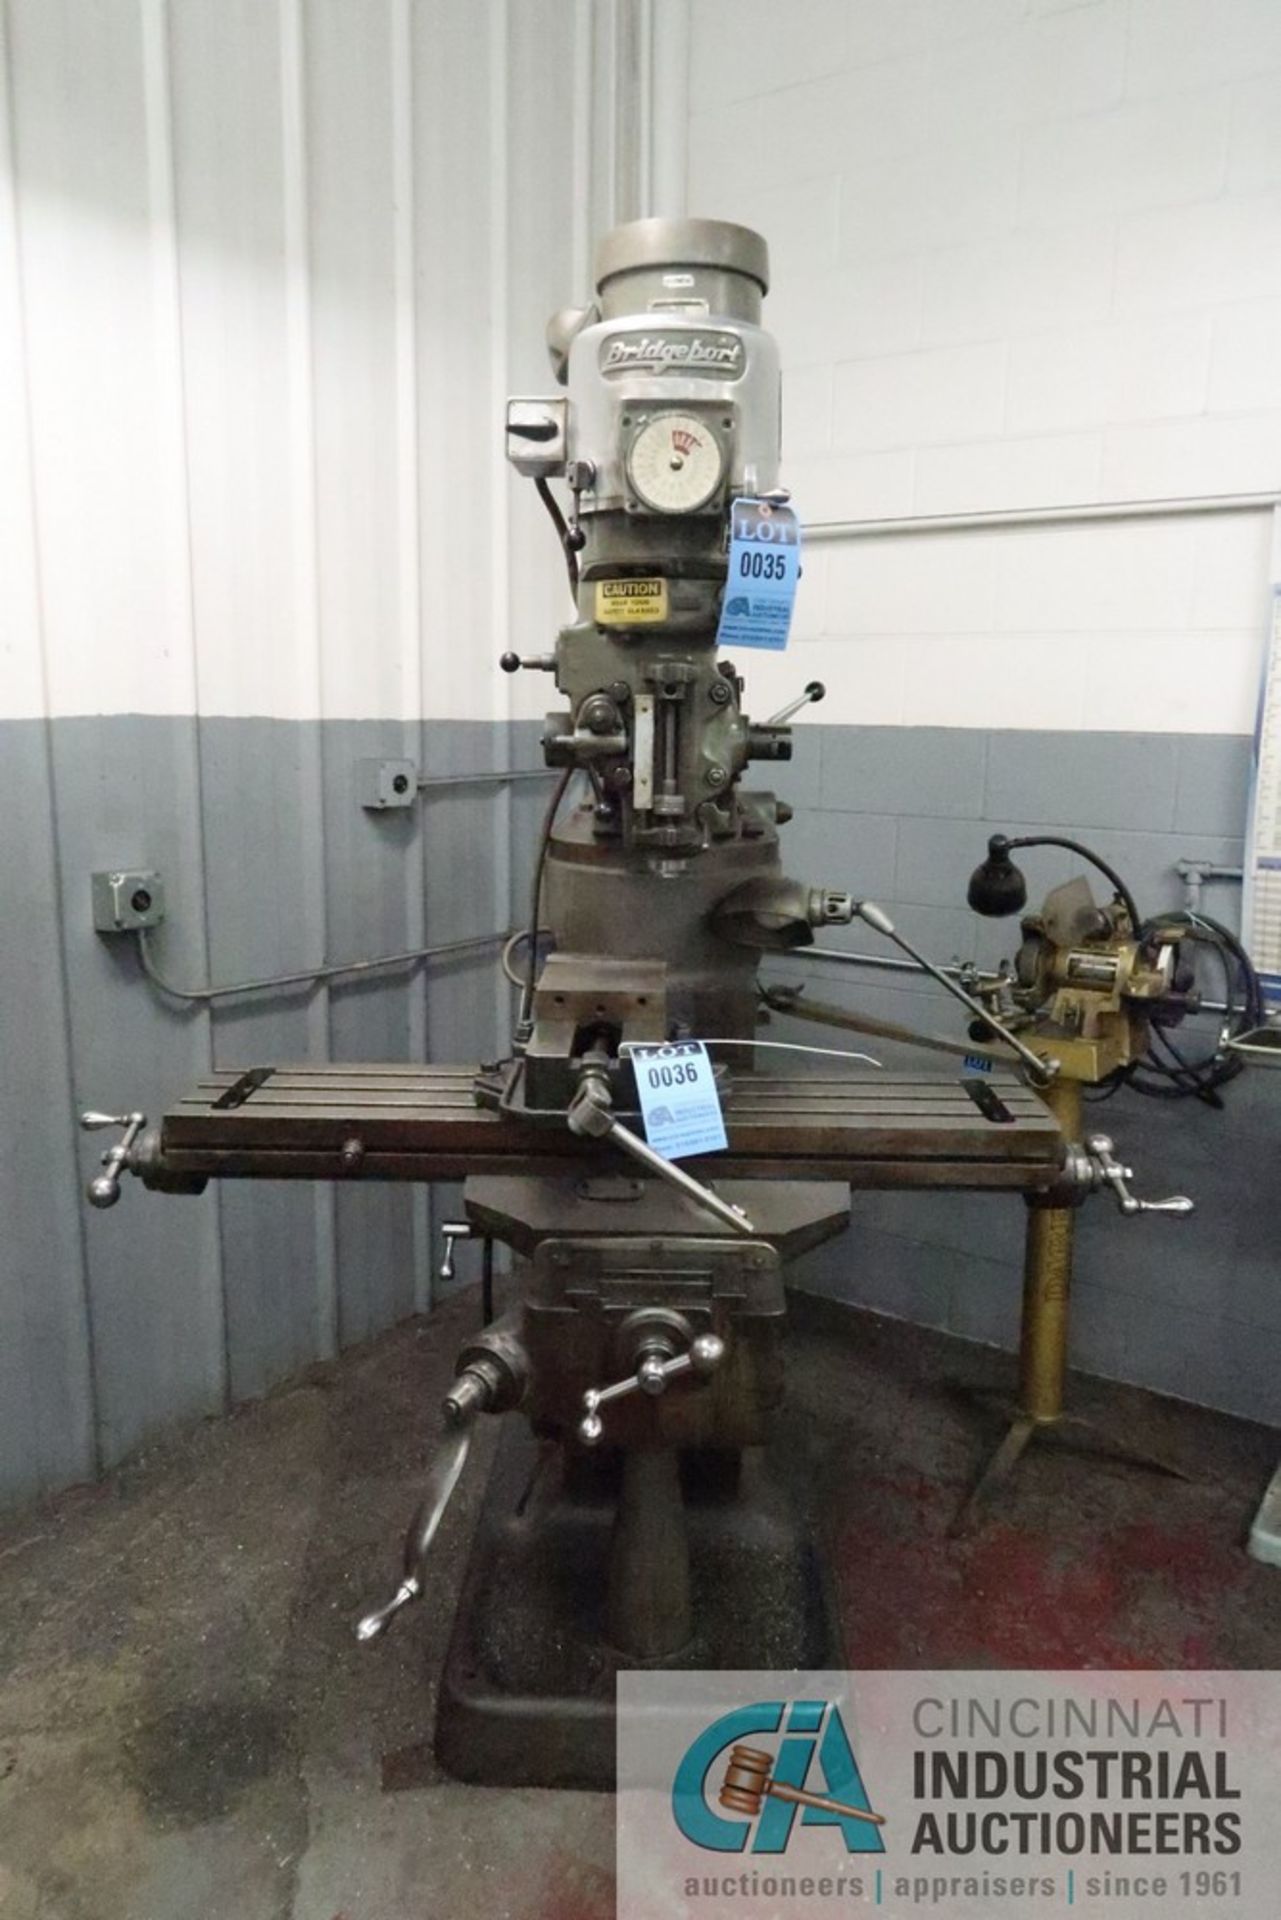 1-1/2 HP BRIDGEPORT VERTICAL MILL; S/N 129764, 9" X 42" TABLE, SPINDLE SPEED 60-4,200 RPM - Image 3 of 7